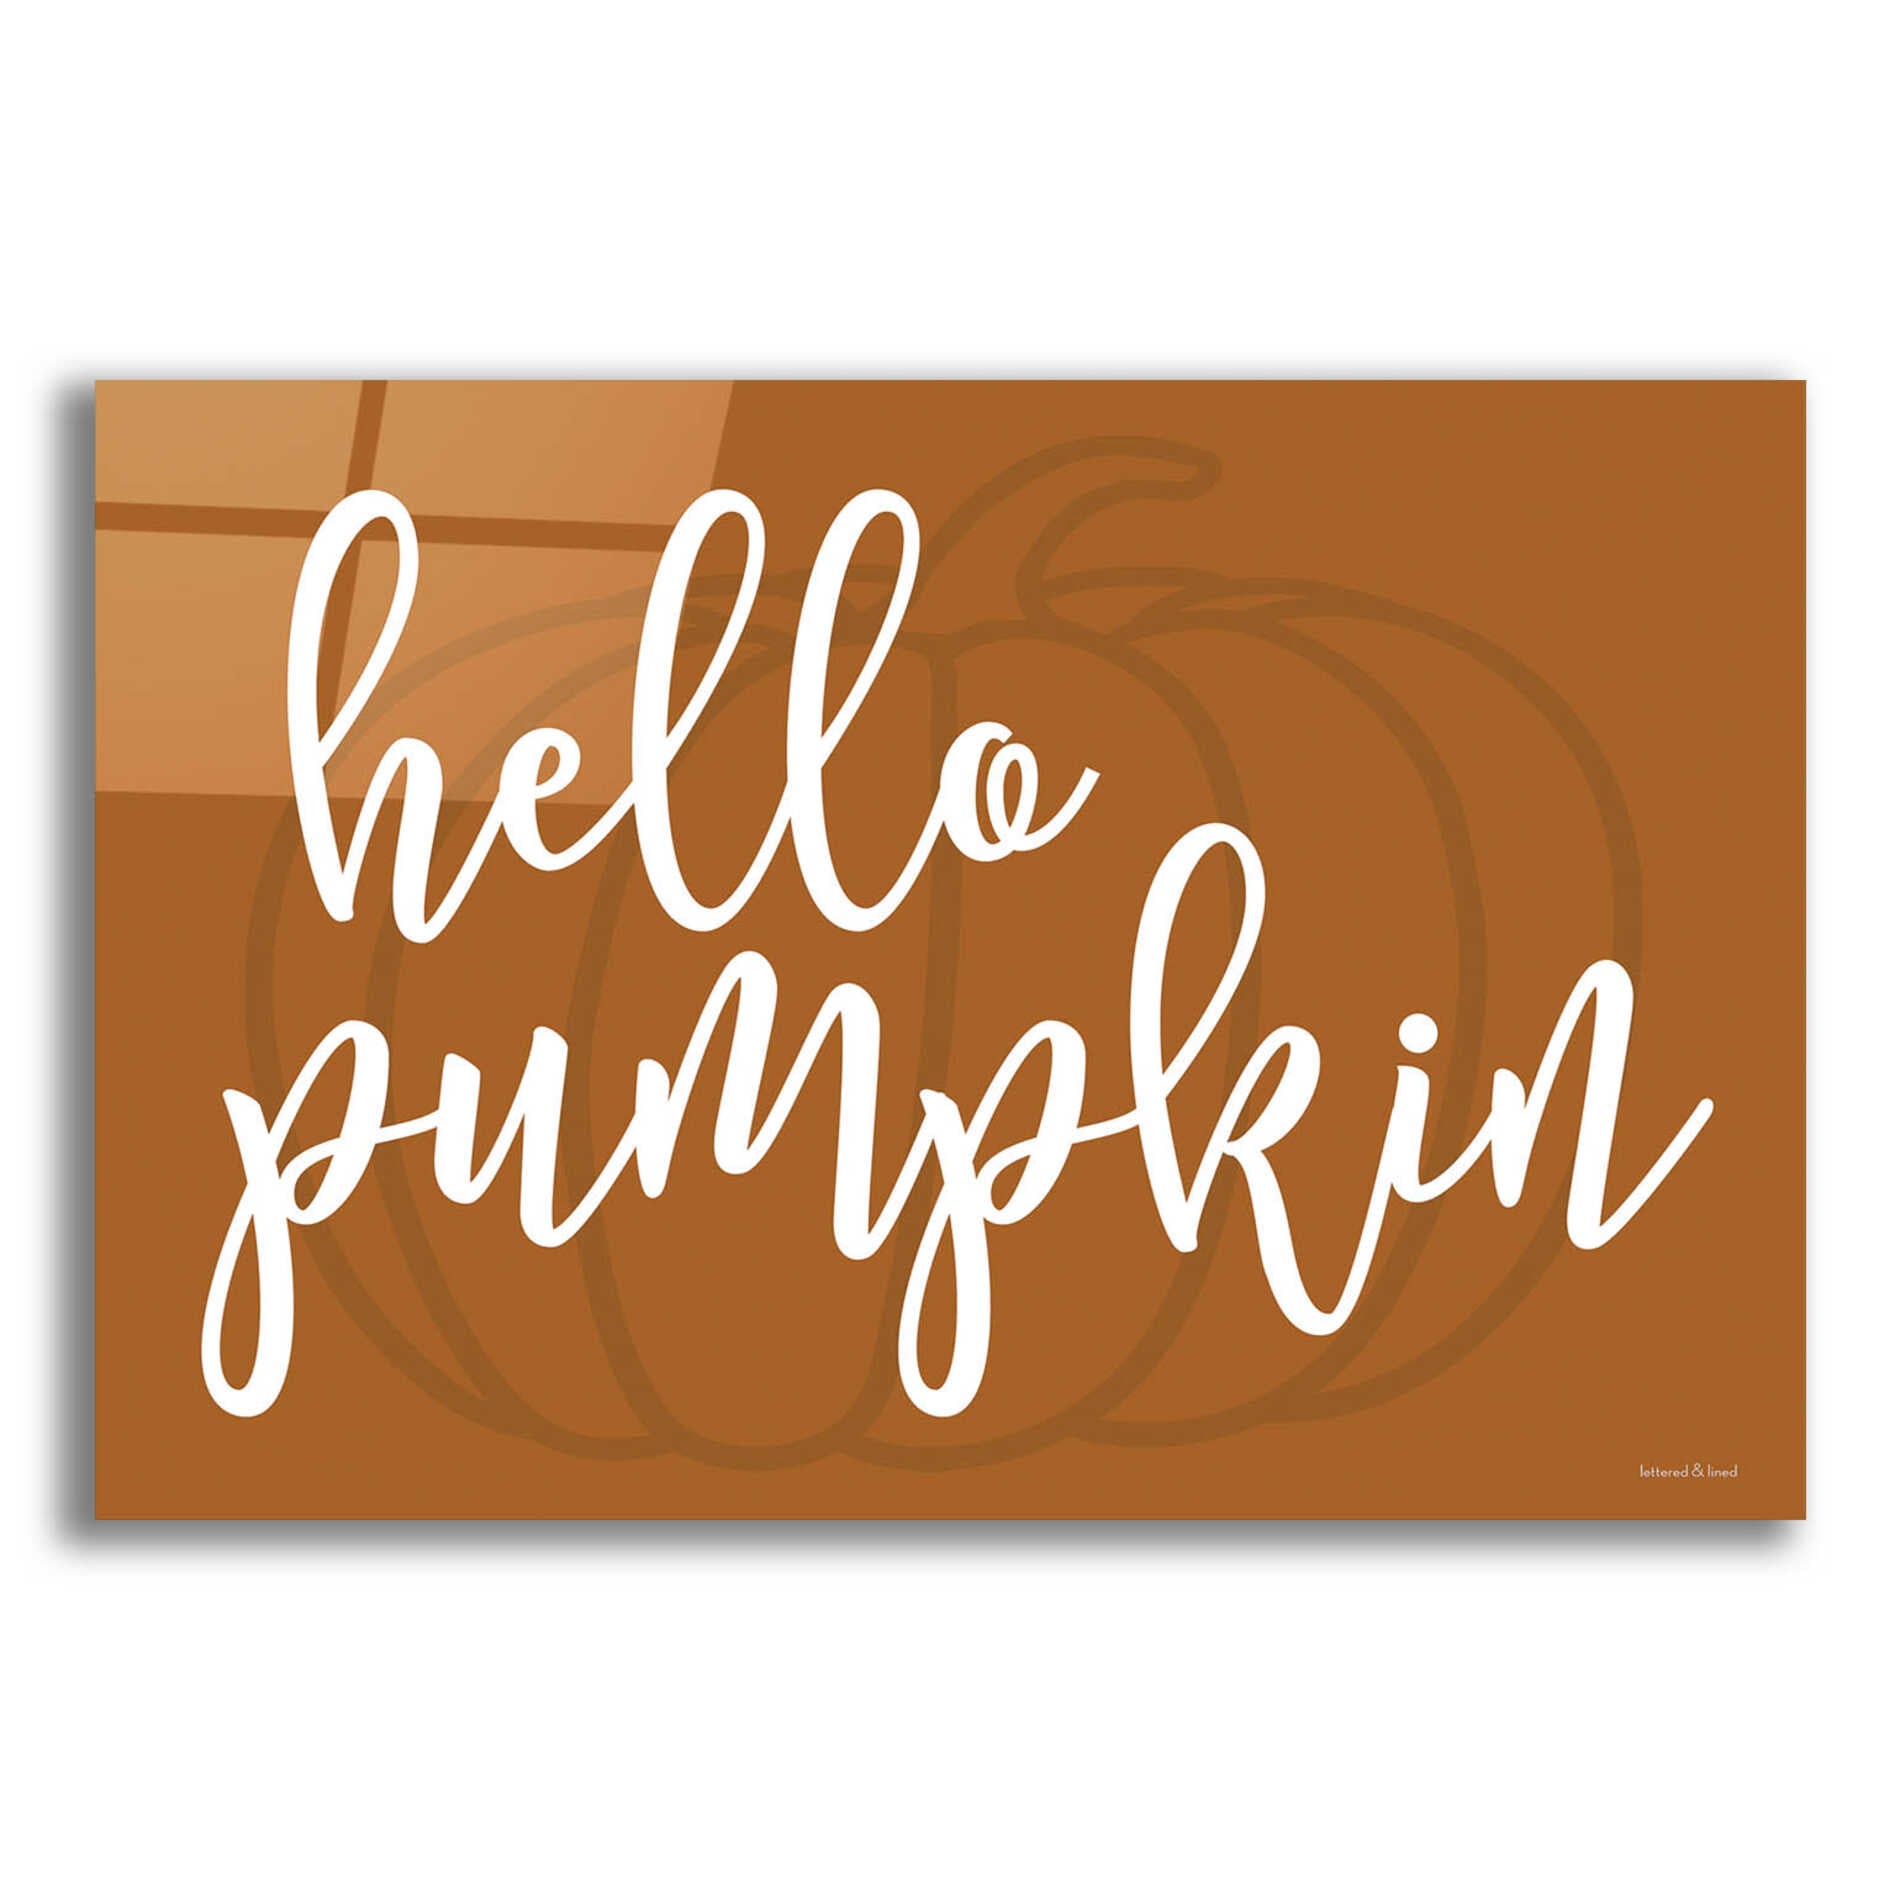 Epic Art 'Hello Pumpkin' by Lettered & Lined, Acrylic Glass Wall Art,16x12